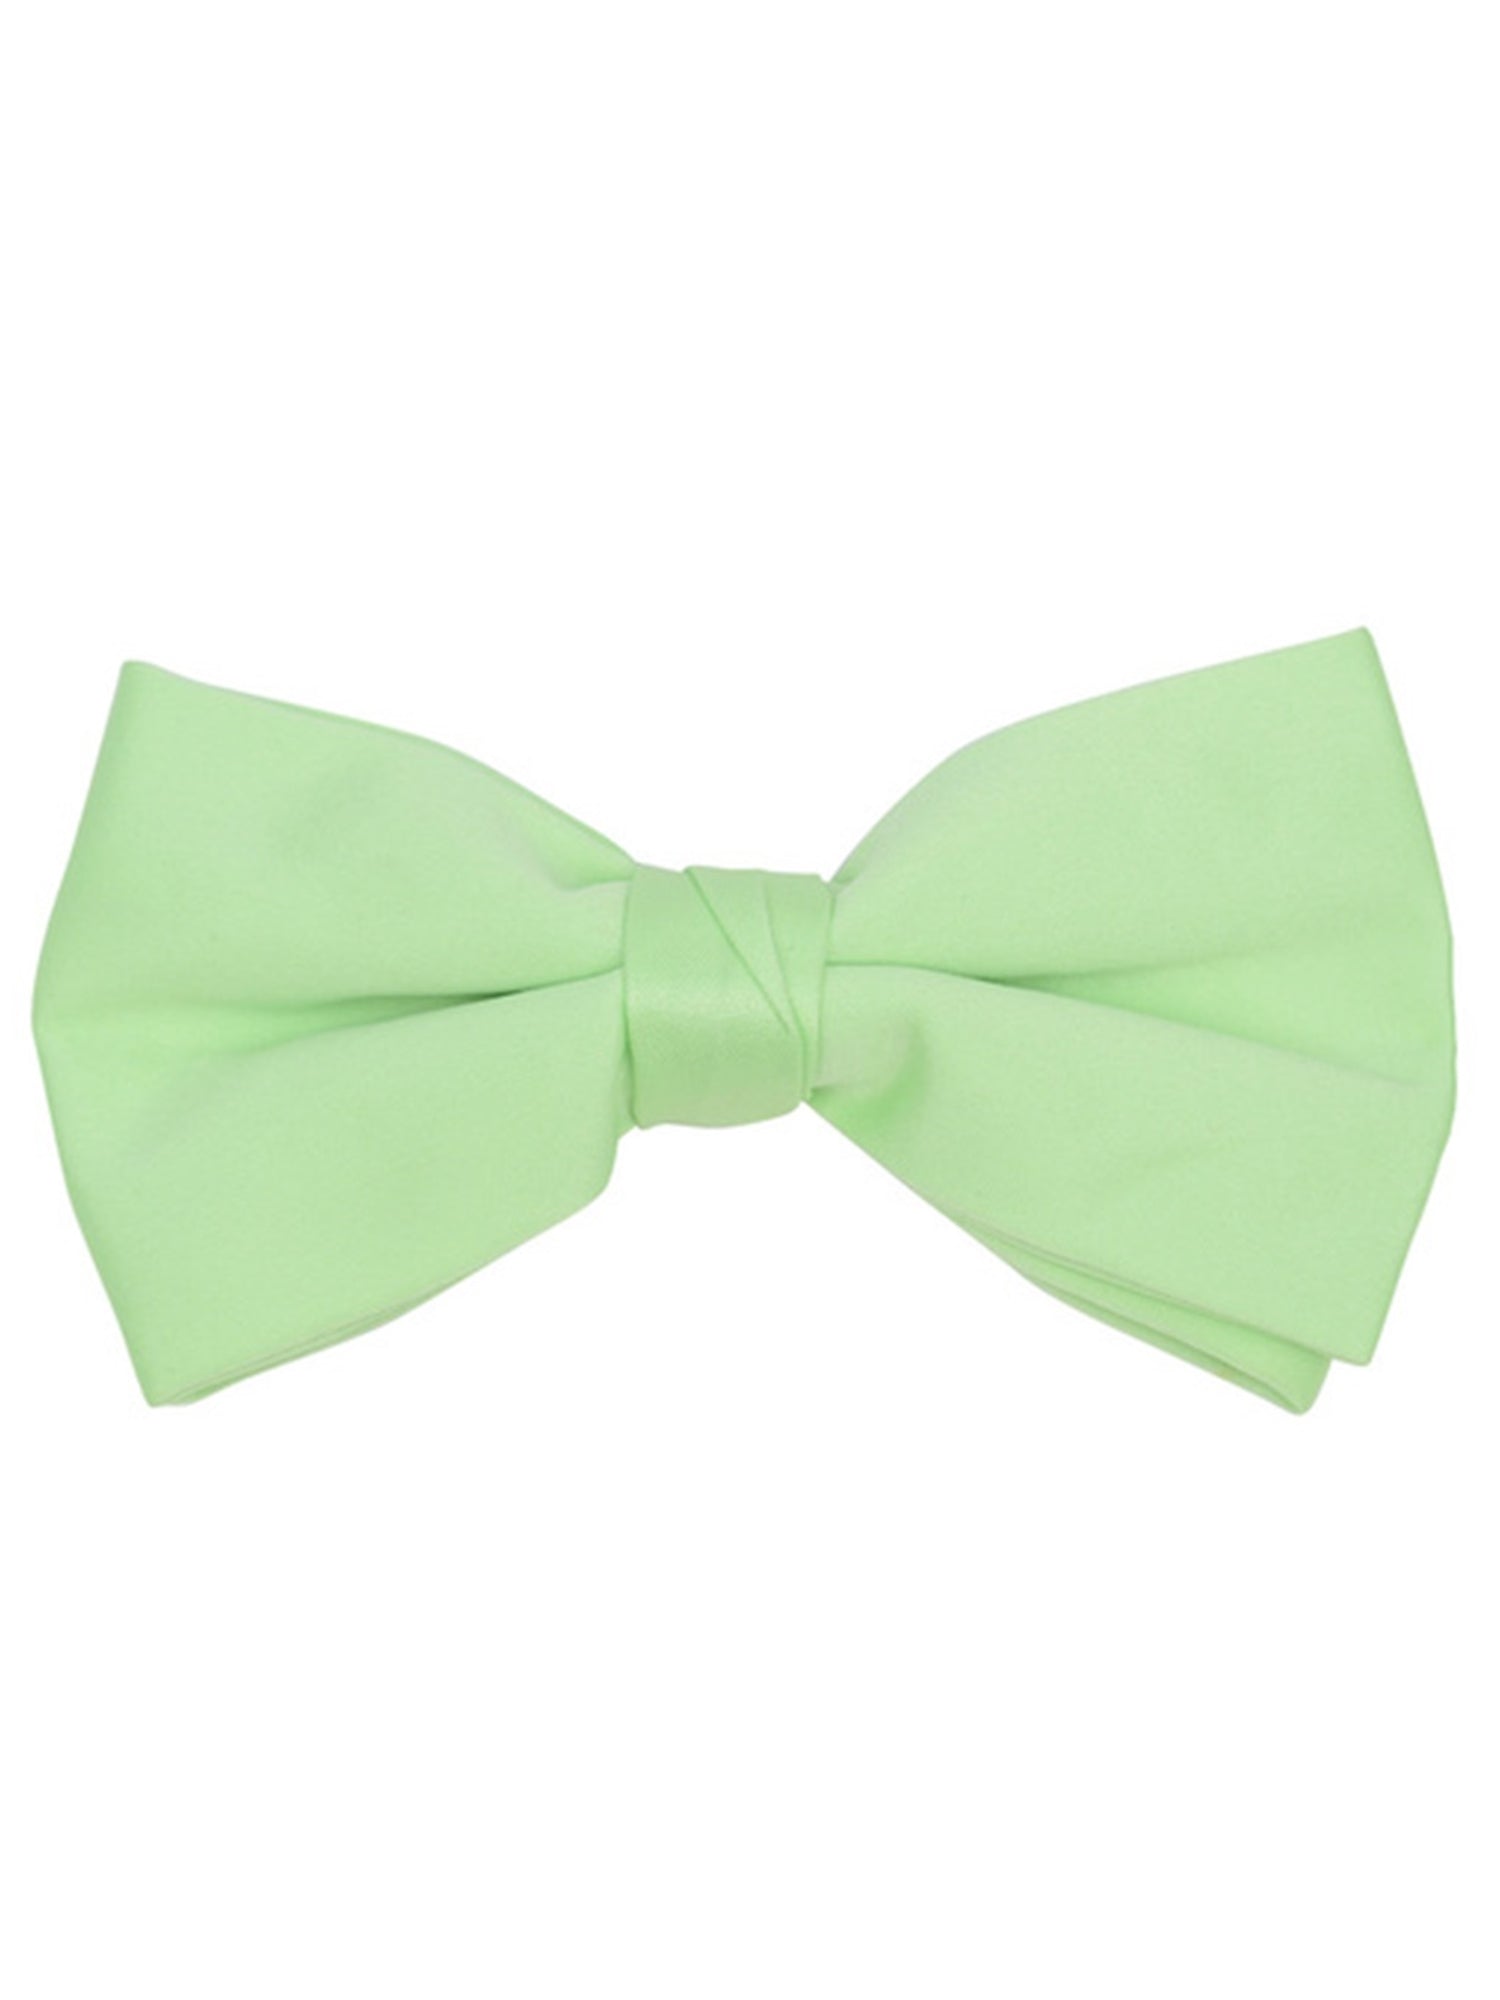 Men's Pre-tied Adjustable Length Bow Tie - Formal Tuxedo Solid Color Men's Solid Color Bow Tie TheDapperTie Lime One Size 